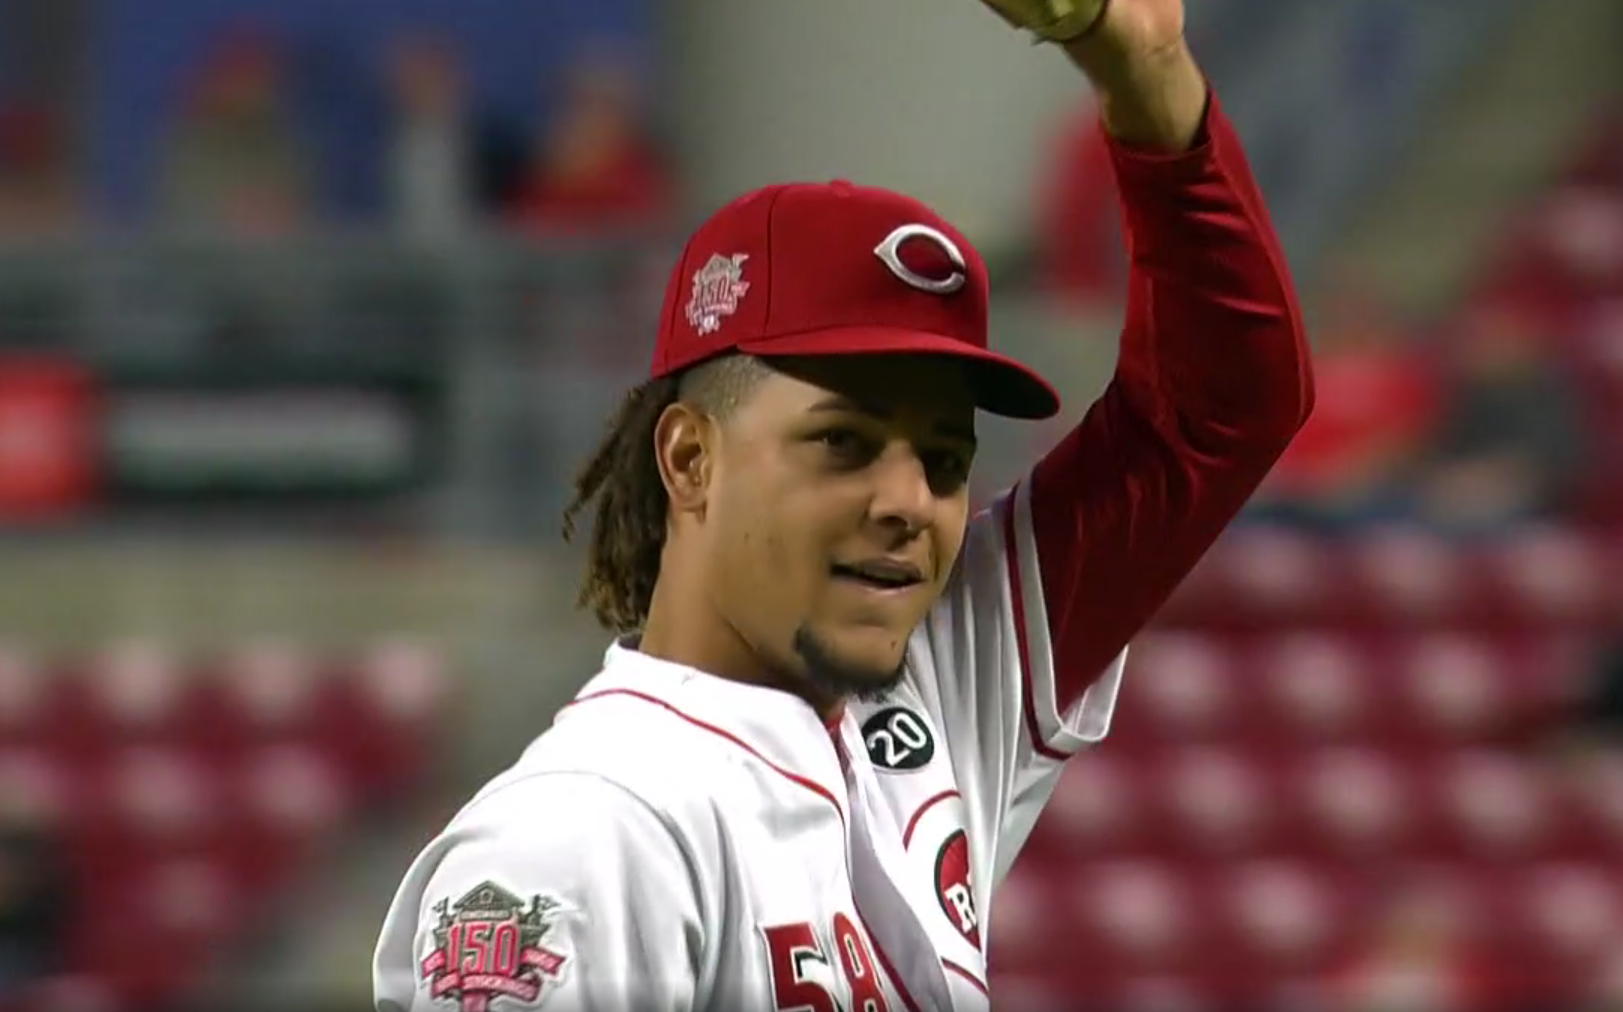 Pitching Ace Luis Castillo to Represent the Cincinnati Reds at the